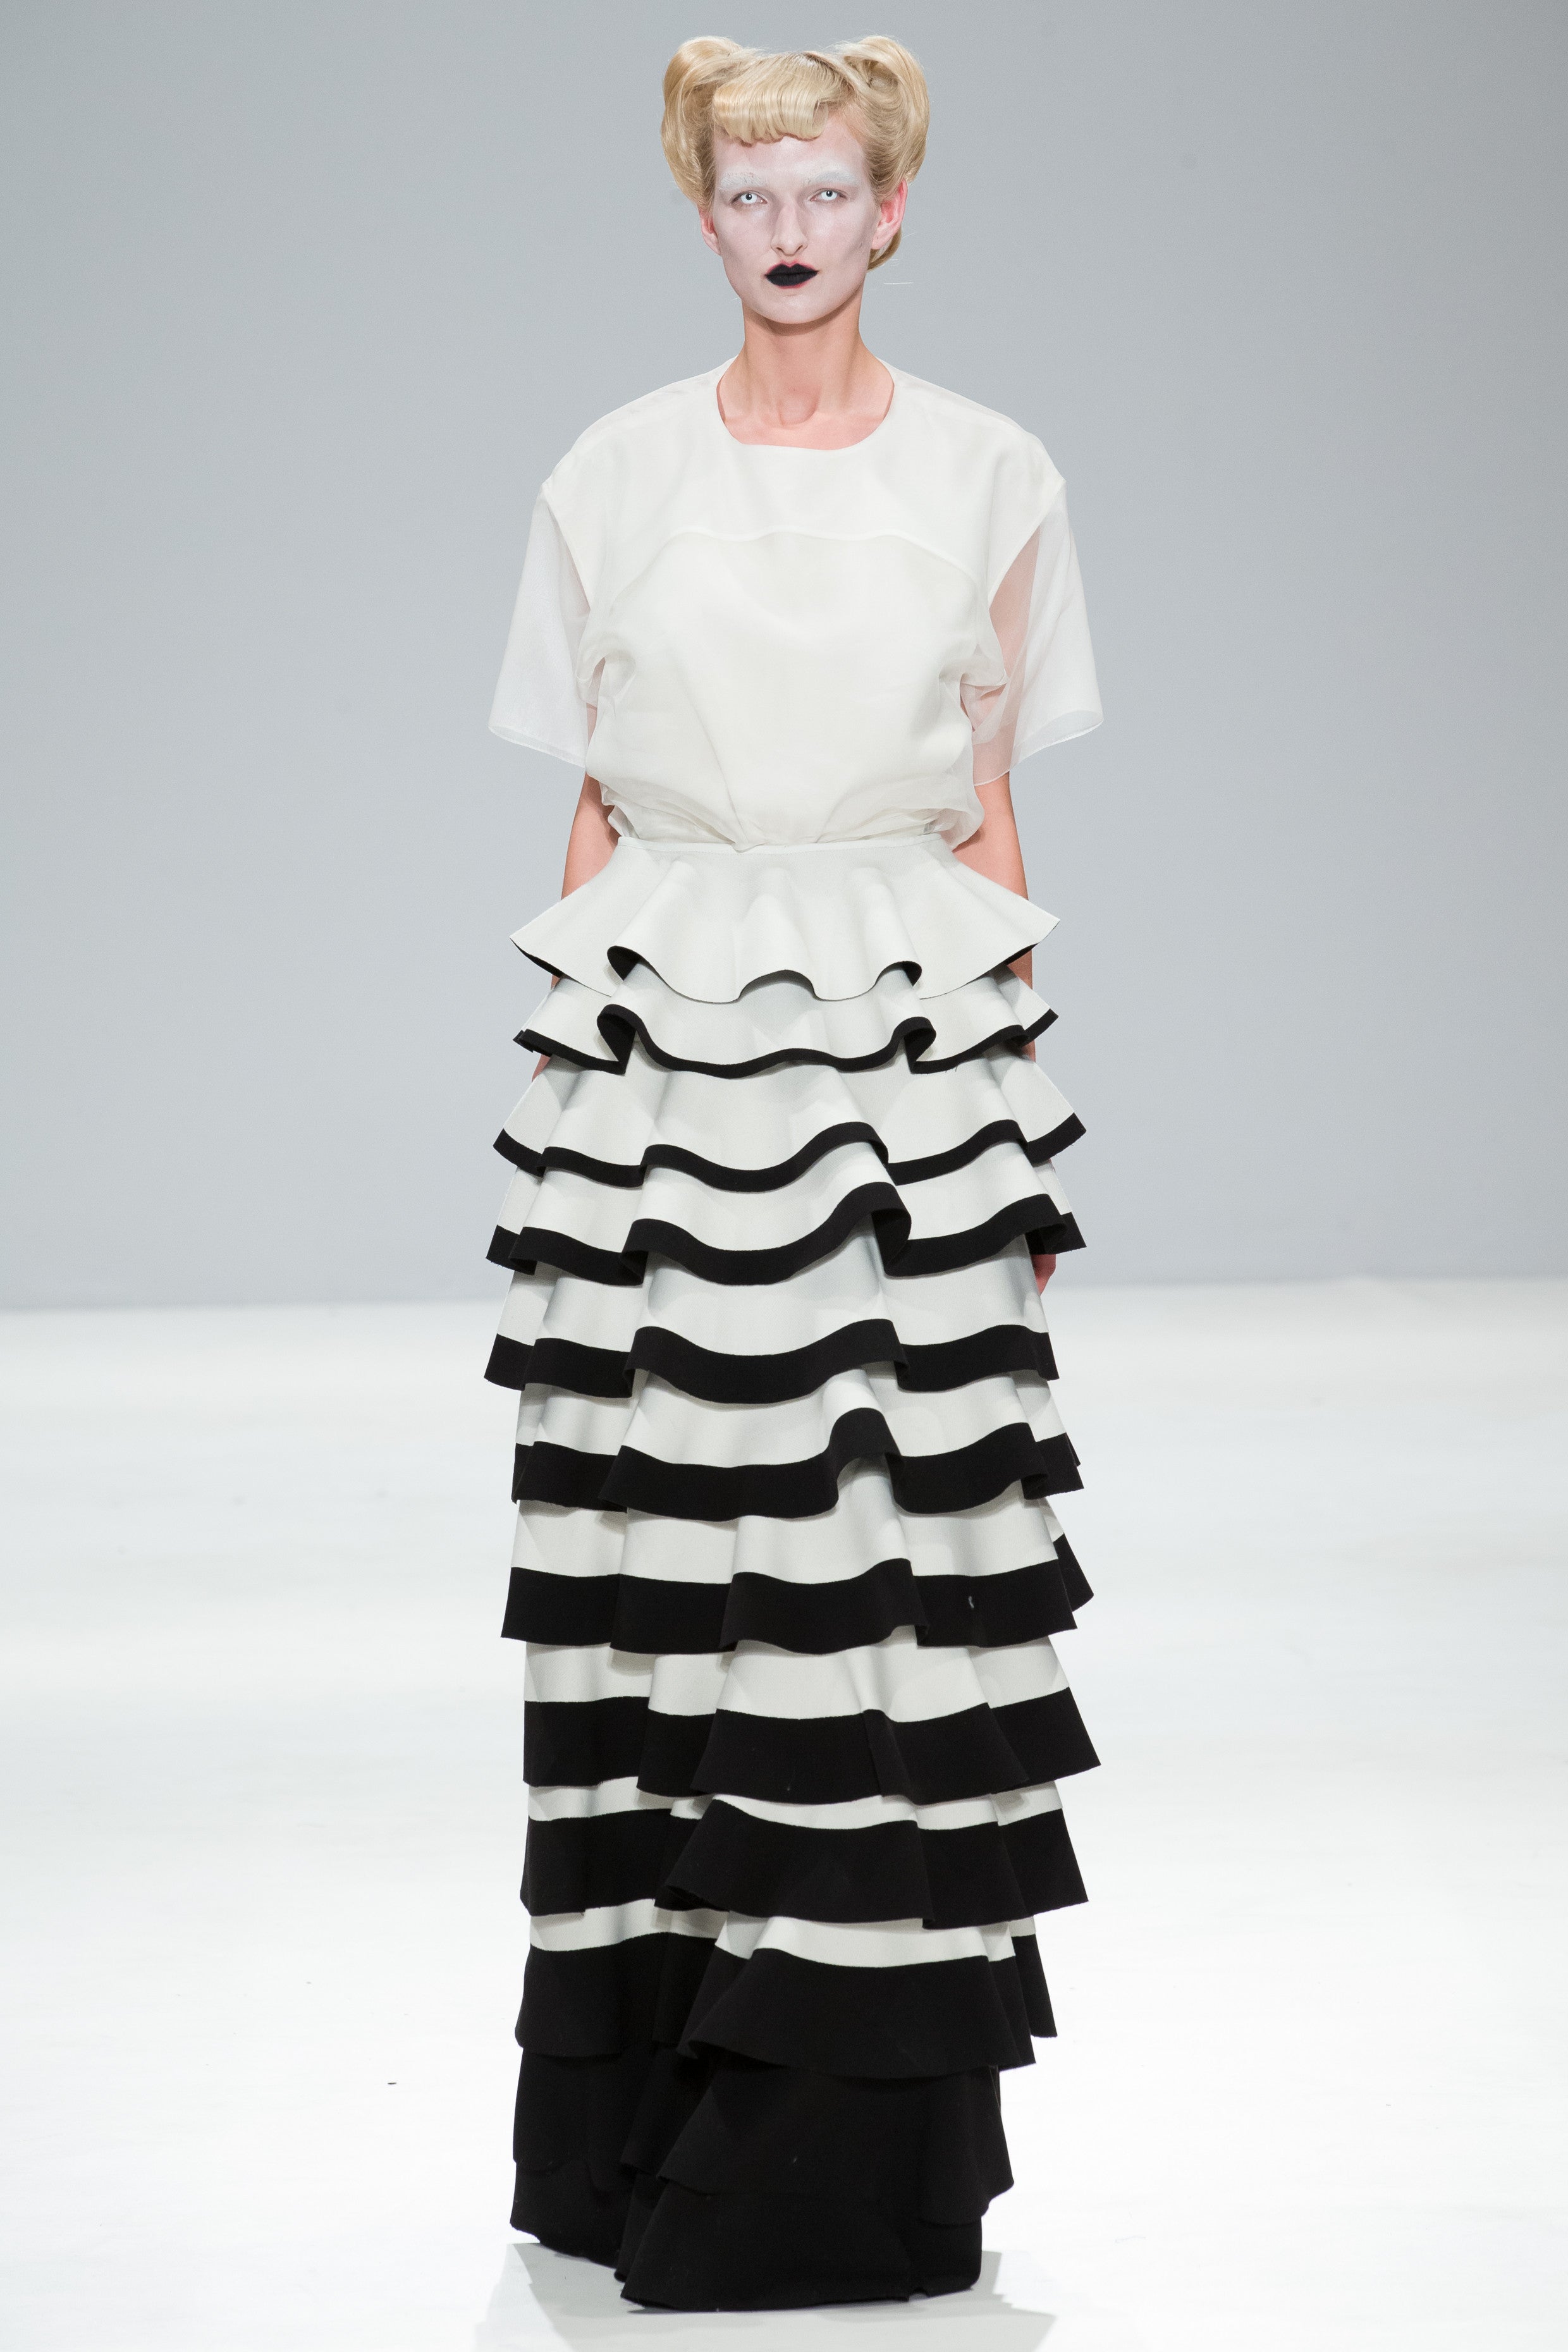 Cimone's AW18 modern 'op-art' style skirt is a sculptural take on the ruffle. The full length “Vex” skirt is created with fully bonded heavy wool and technical fabric to create a hard angular, graphic, shape; in contrast to the soft delicate, feminine silhouette that is often associated with a ruffle skirt.